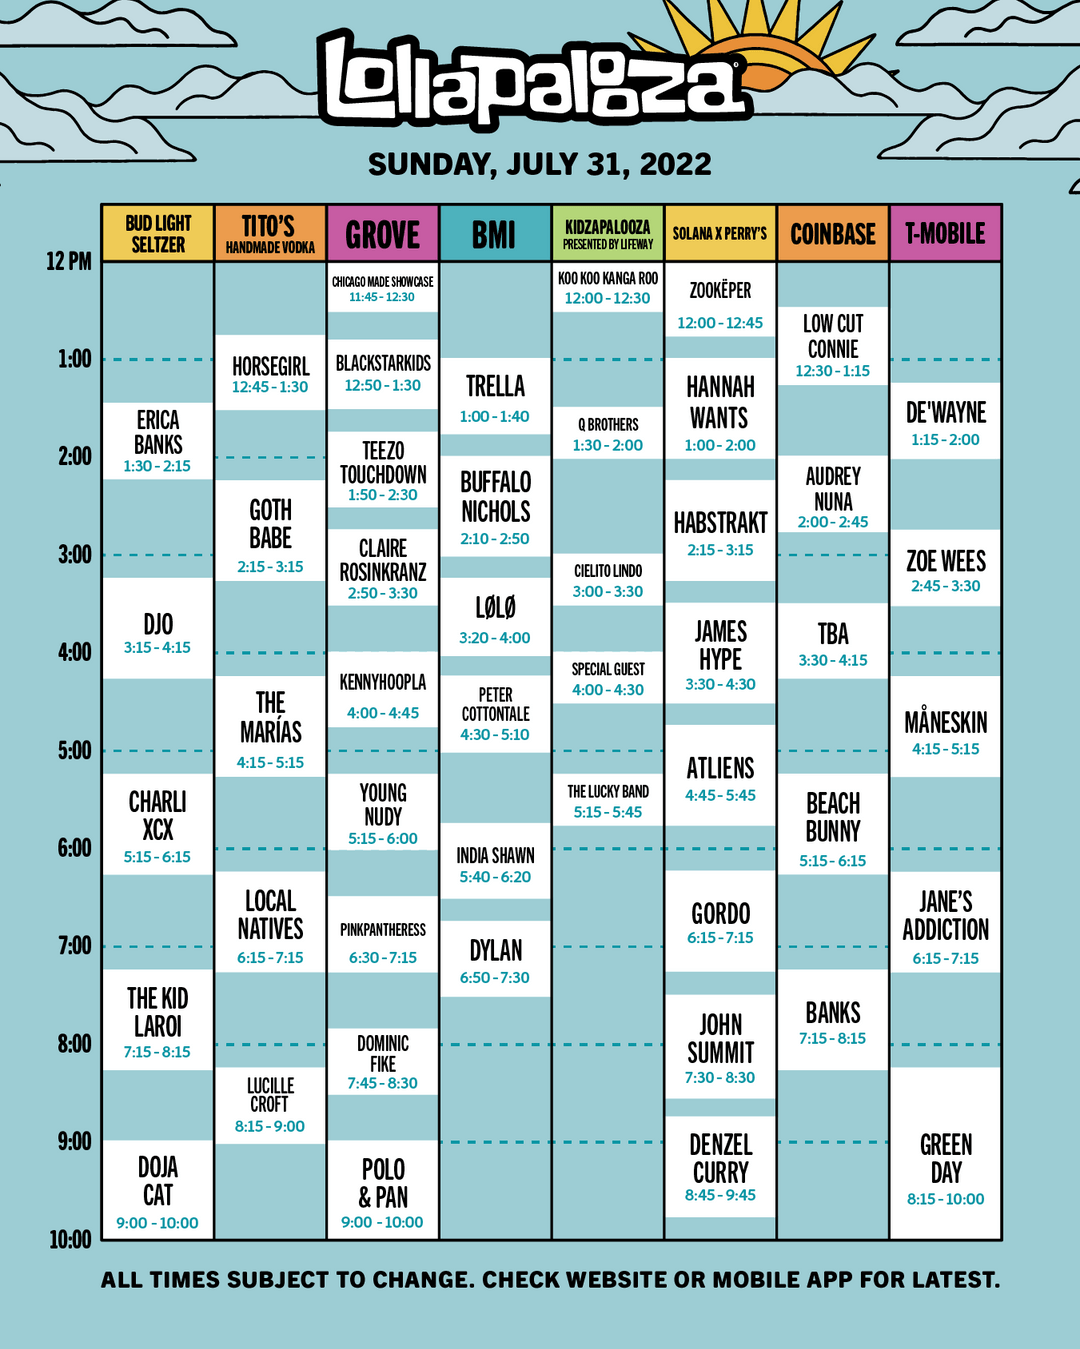 2022 Lollapalooza Schedule Announced 4